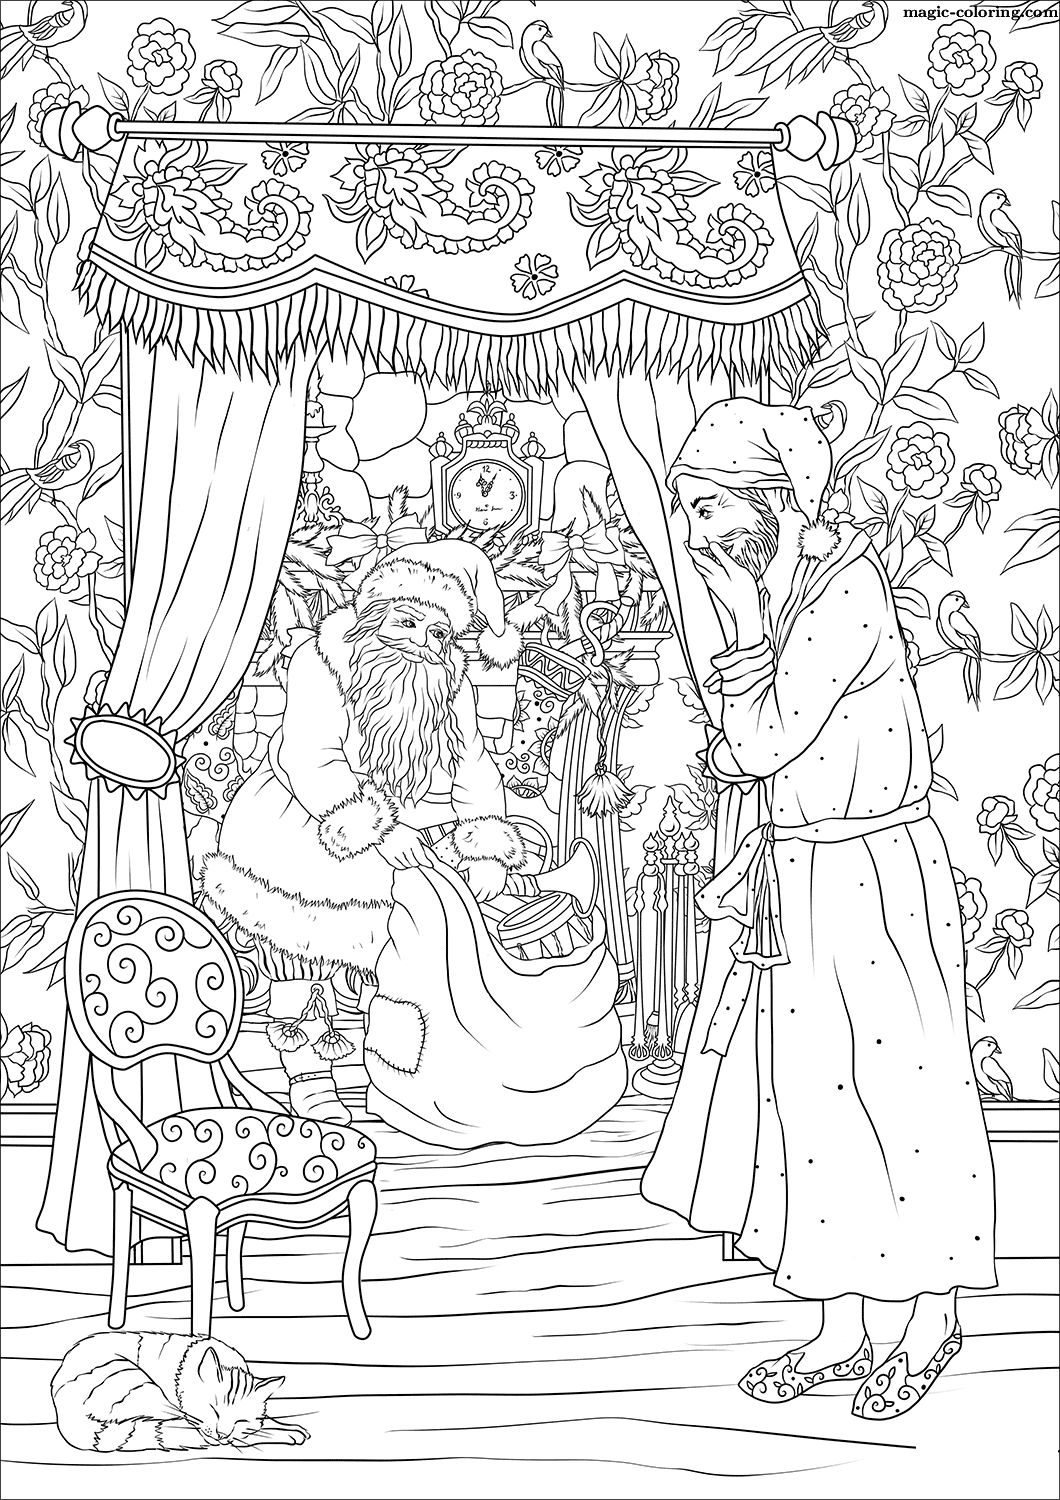 How I met Saint Nickolas in my house Coloring Page